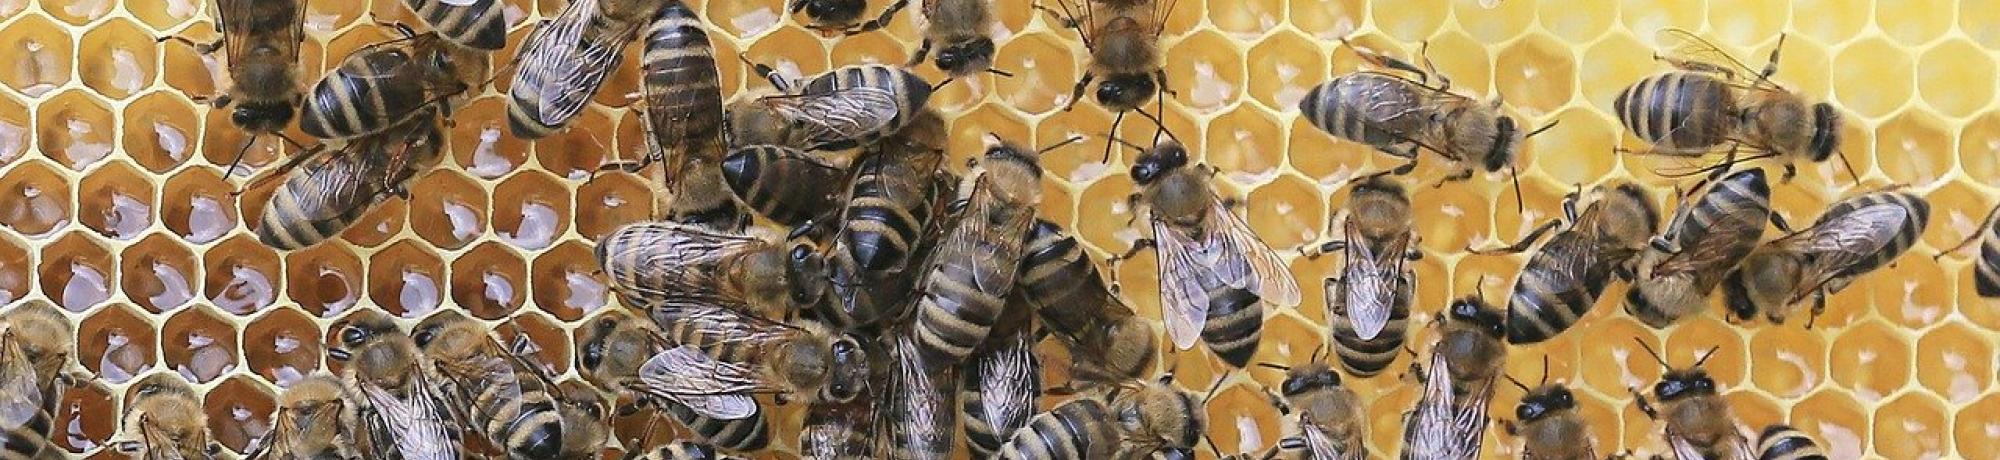 A large gathering of bees on a honeycomb